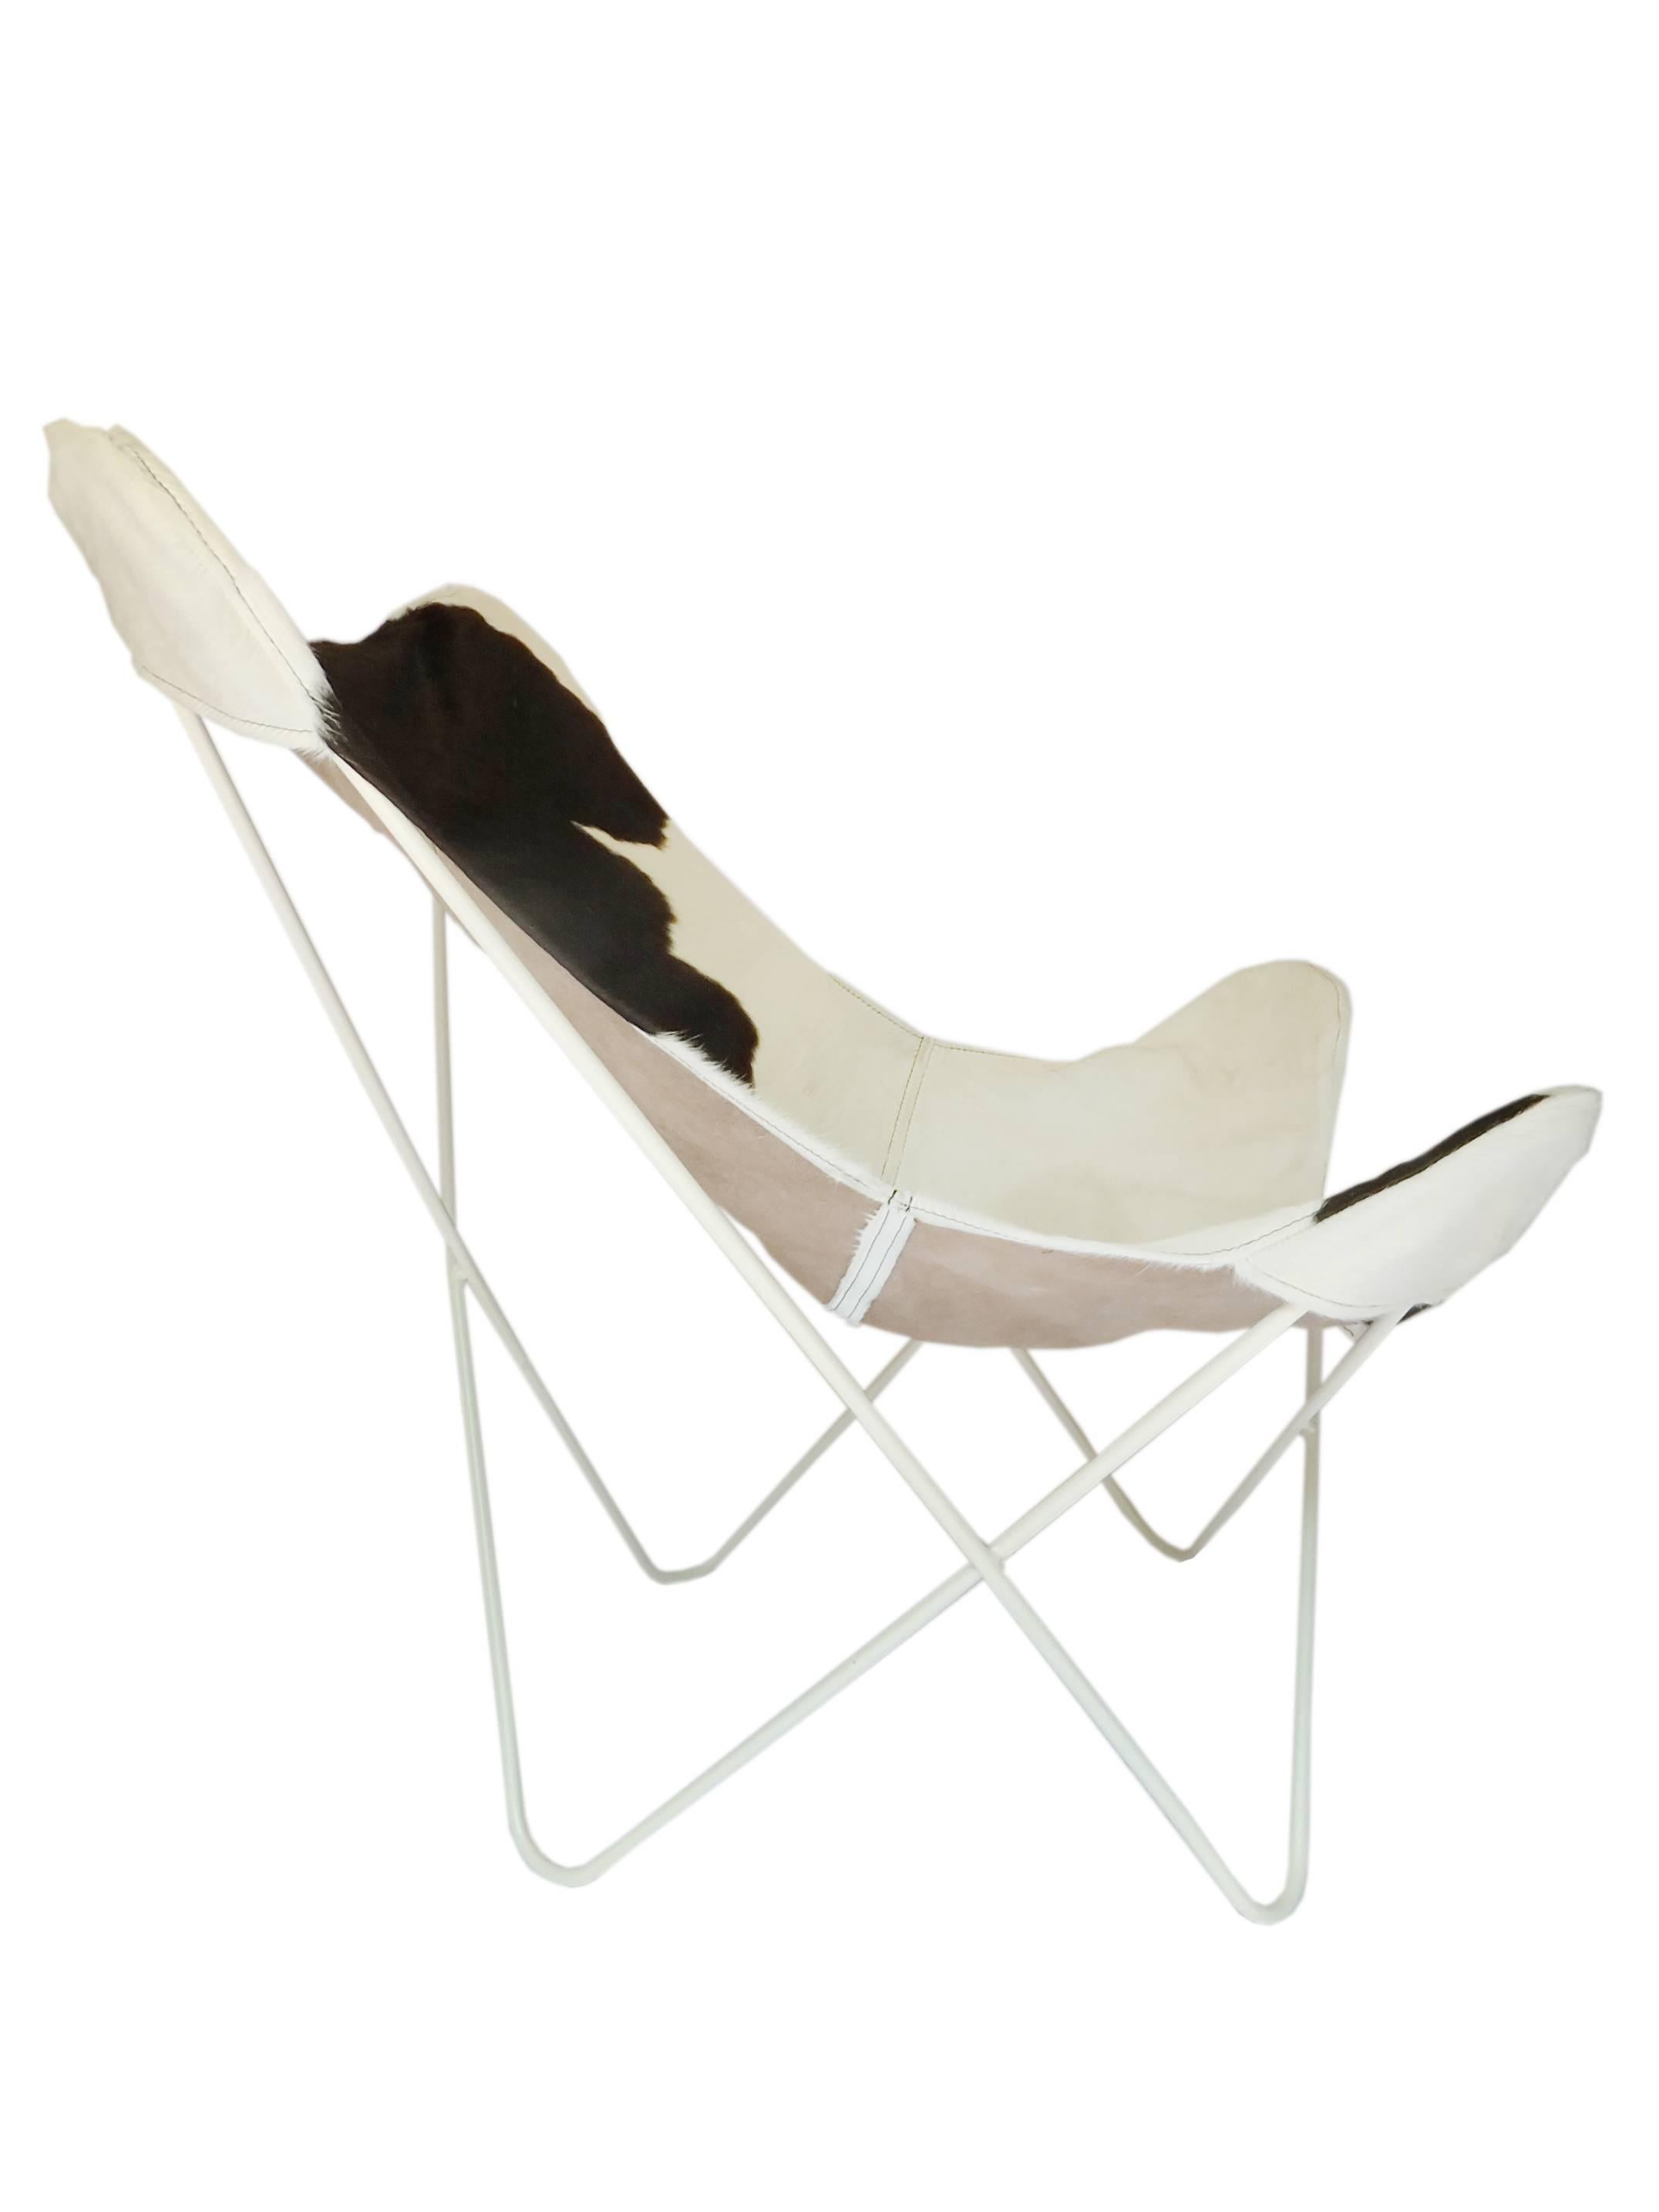 Pair of Cowhide Butterfly Chairs In Excellent Condition For Sale In Bridgehampton, NY